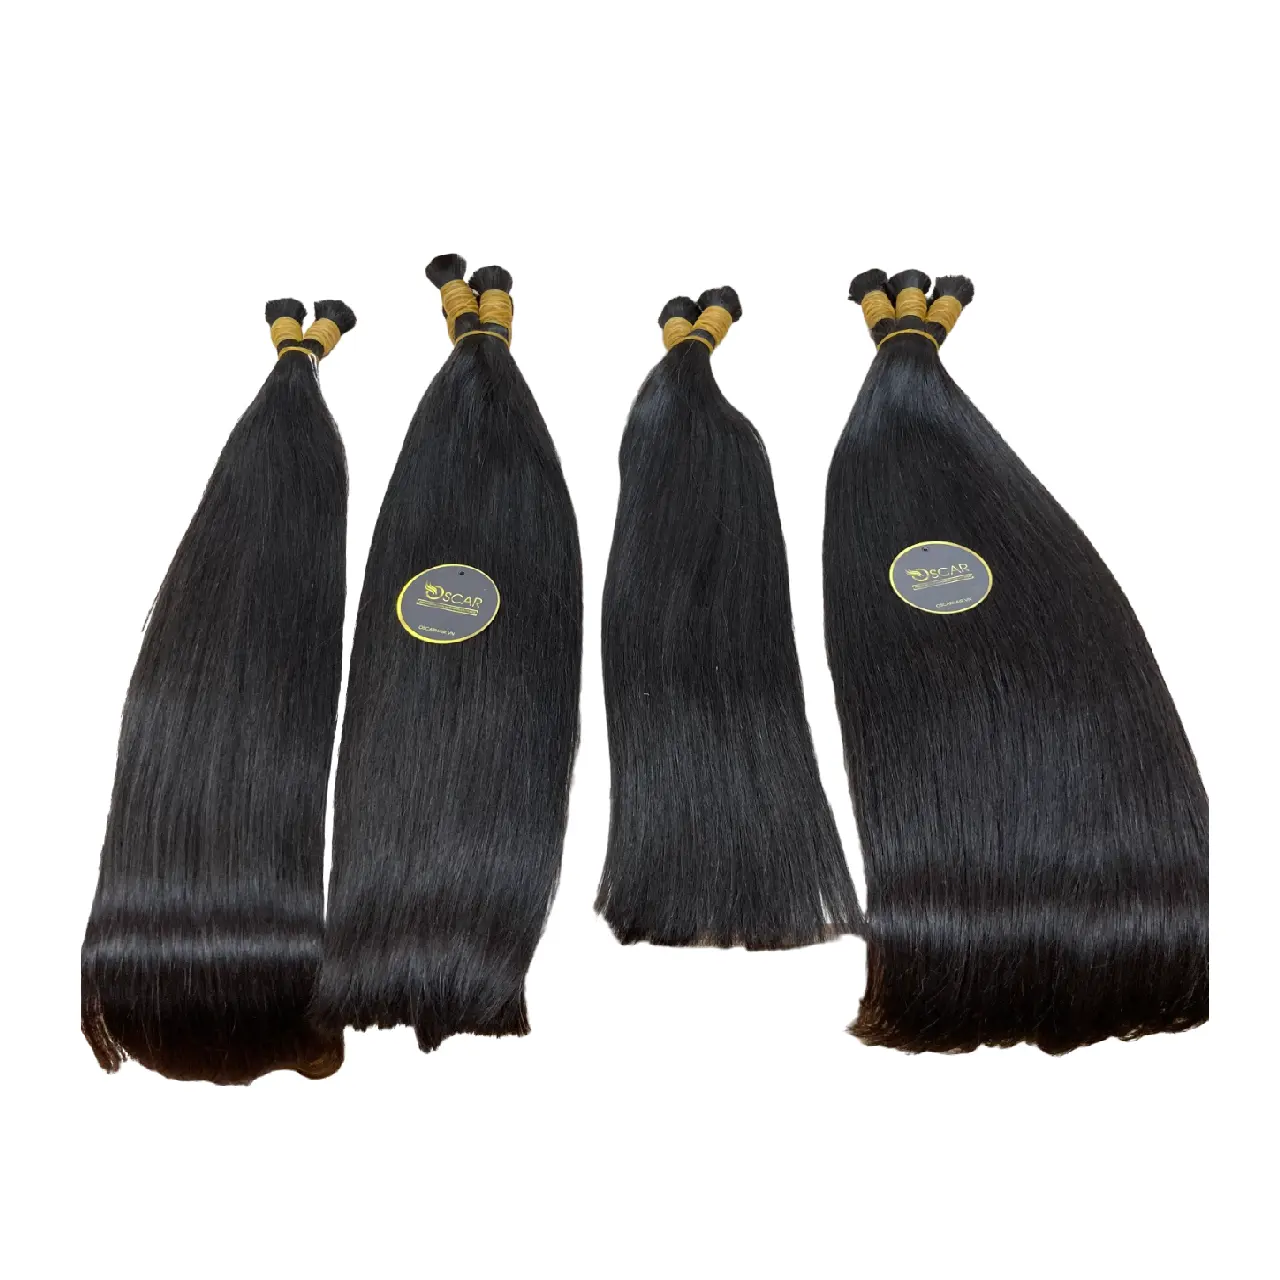 Free Sample 100% natural cuticle aligned wholesale Brazilian hair bundles at factory price for sale